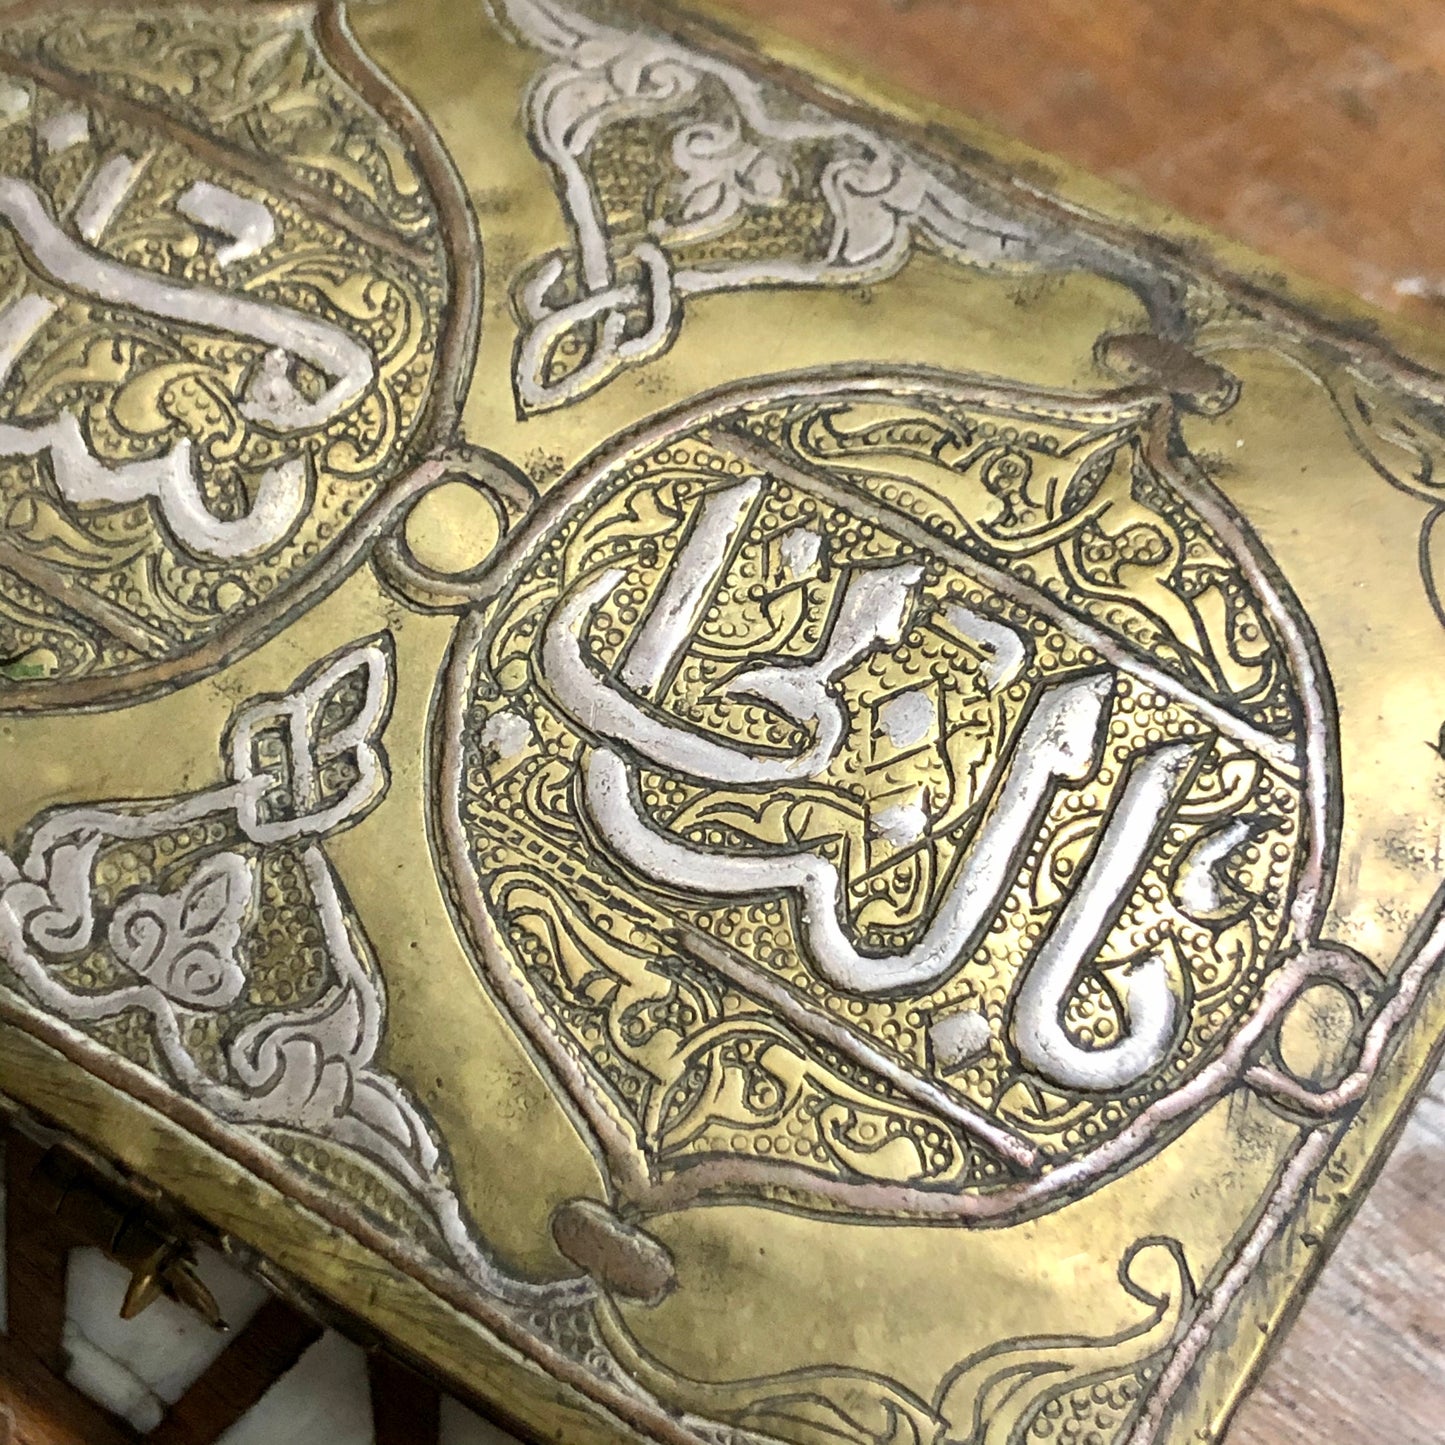 Islamic Copper Box. Made out of Bronze and Silver. Versus of the Holy Quran are sculptured on all sides. 120 Years Old.